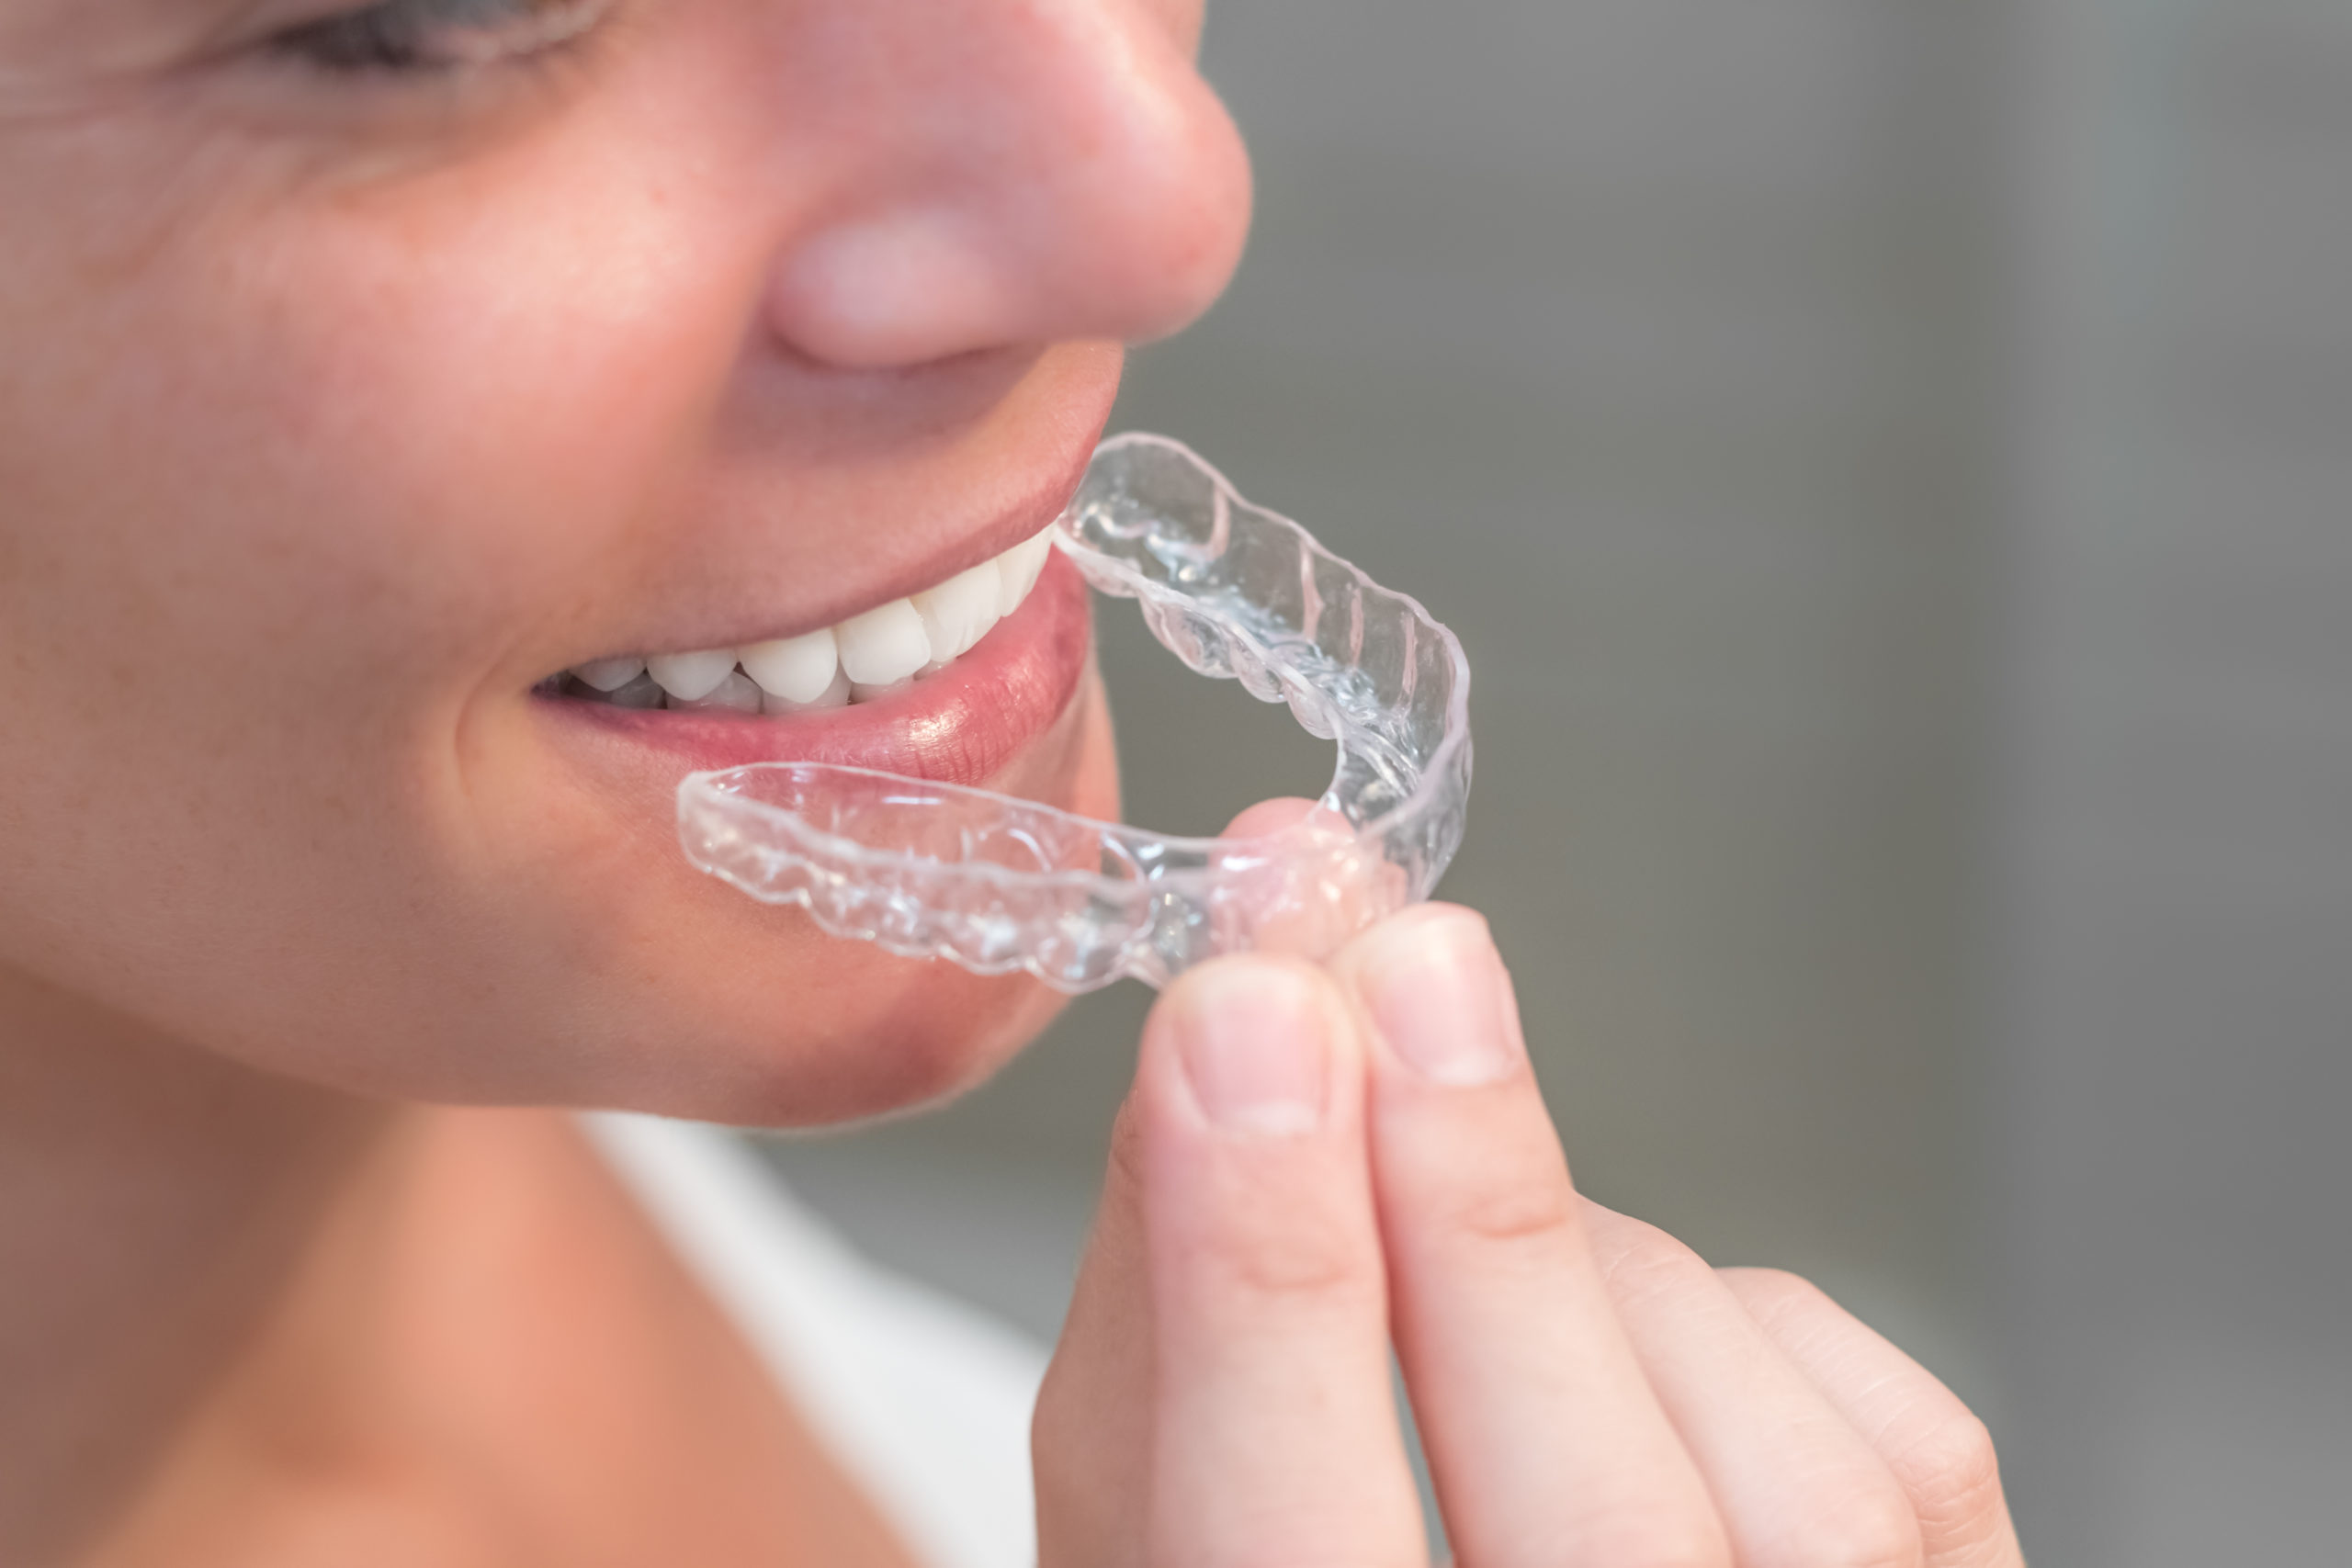 How effective and safe are teeth whitening products